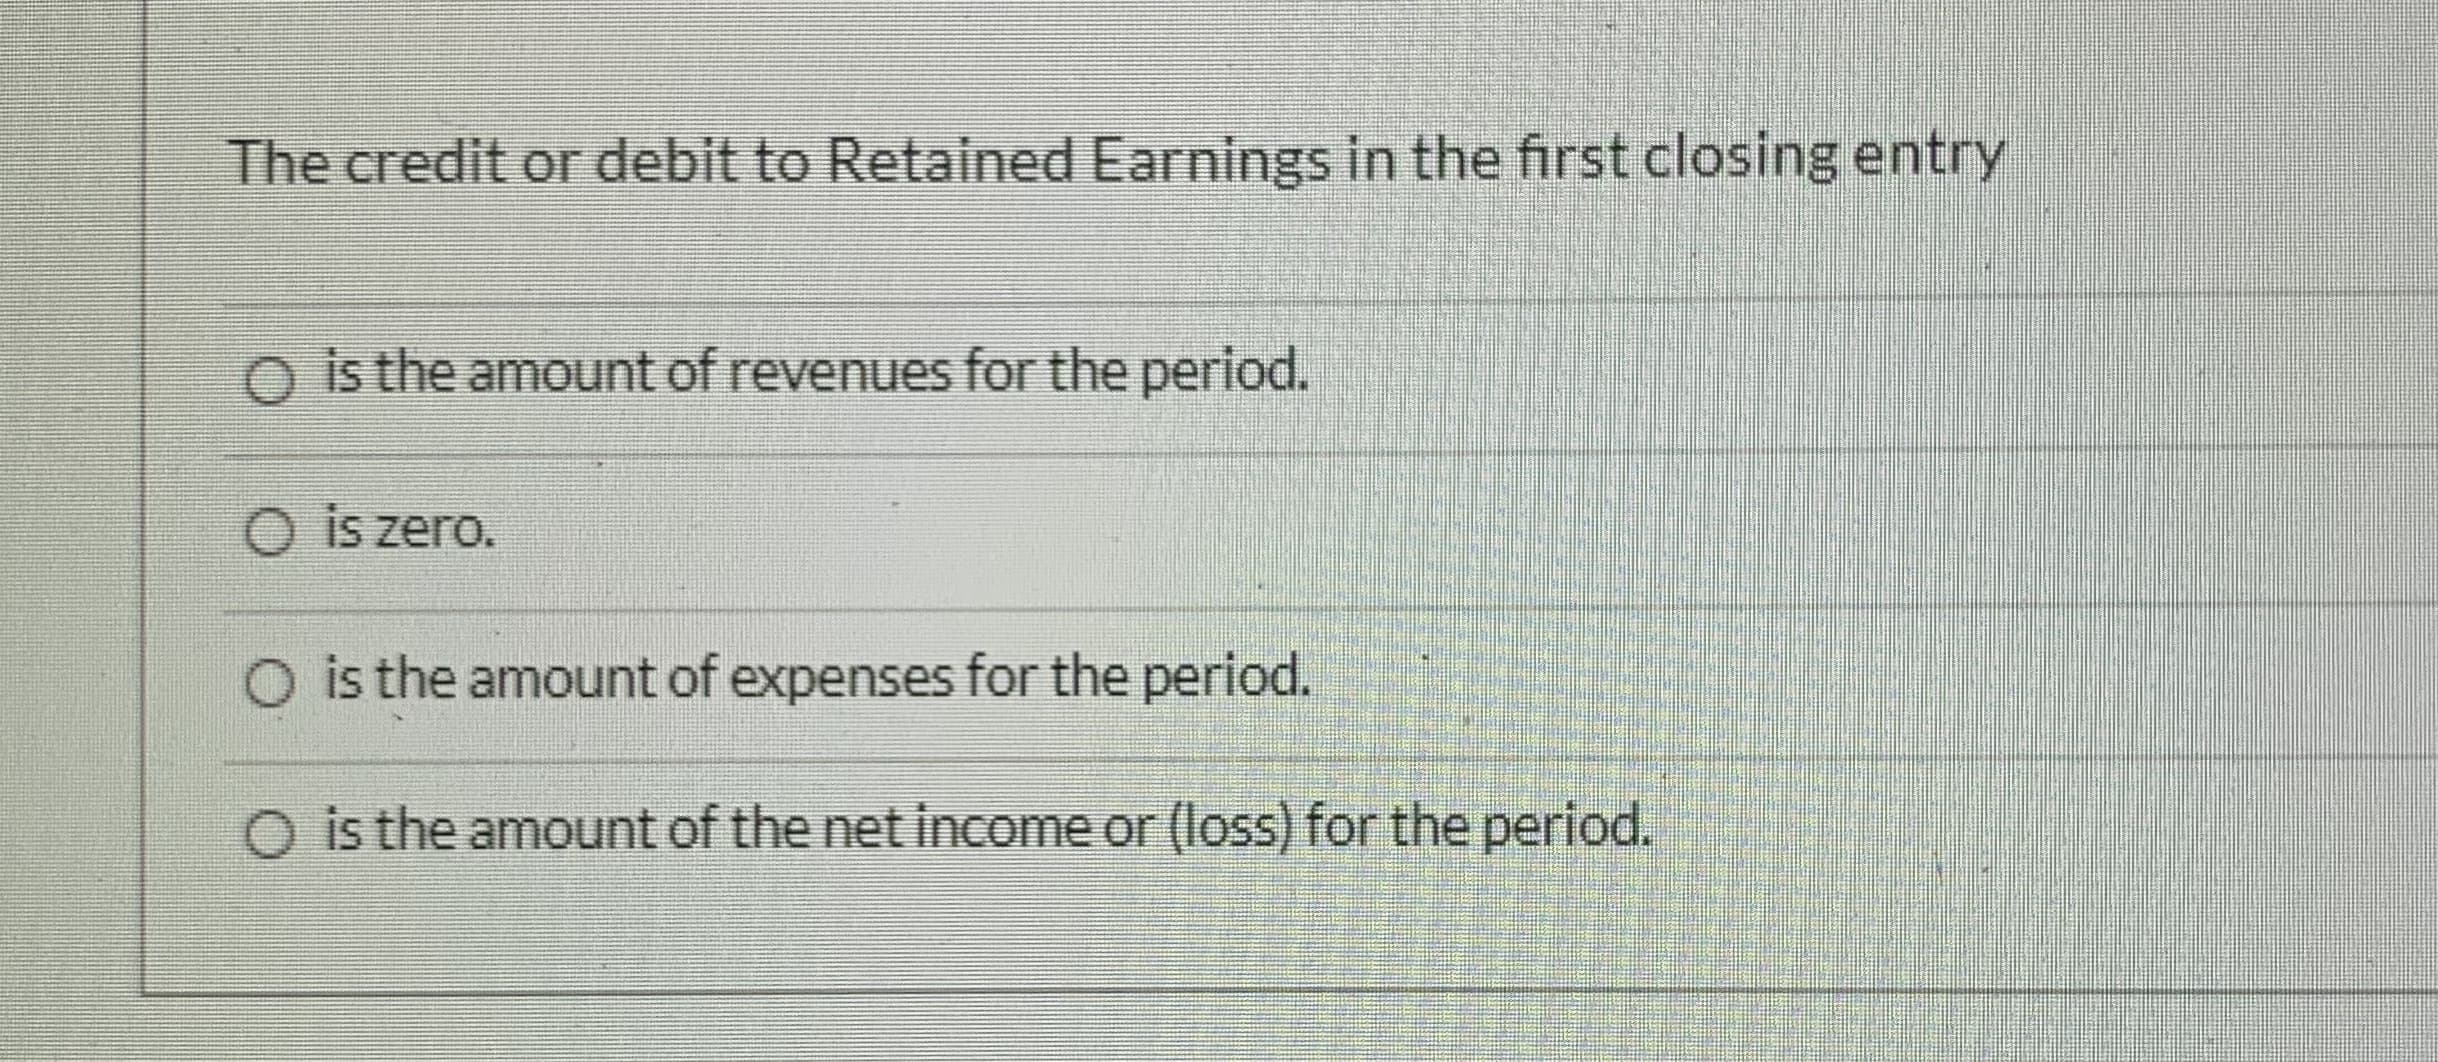 The credit or debit to Retained Earnings in the first closing entry
O is the amount of revenues for the period.
O is zero.
O is the amount of expenses for the period.
is the amount of the net income or (loss) for the period.
